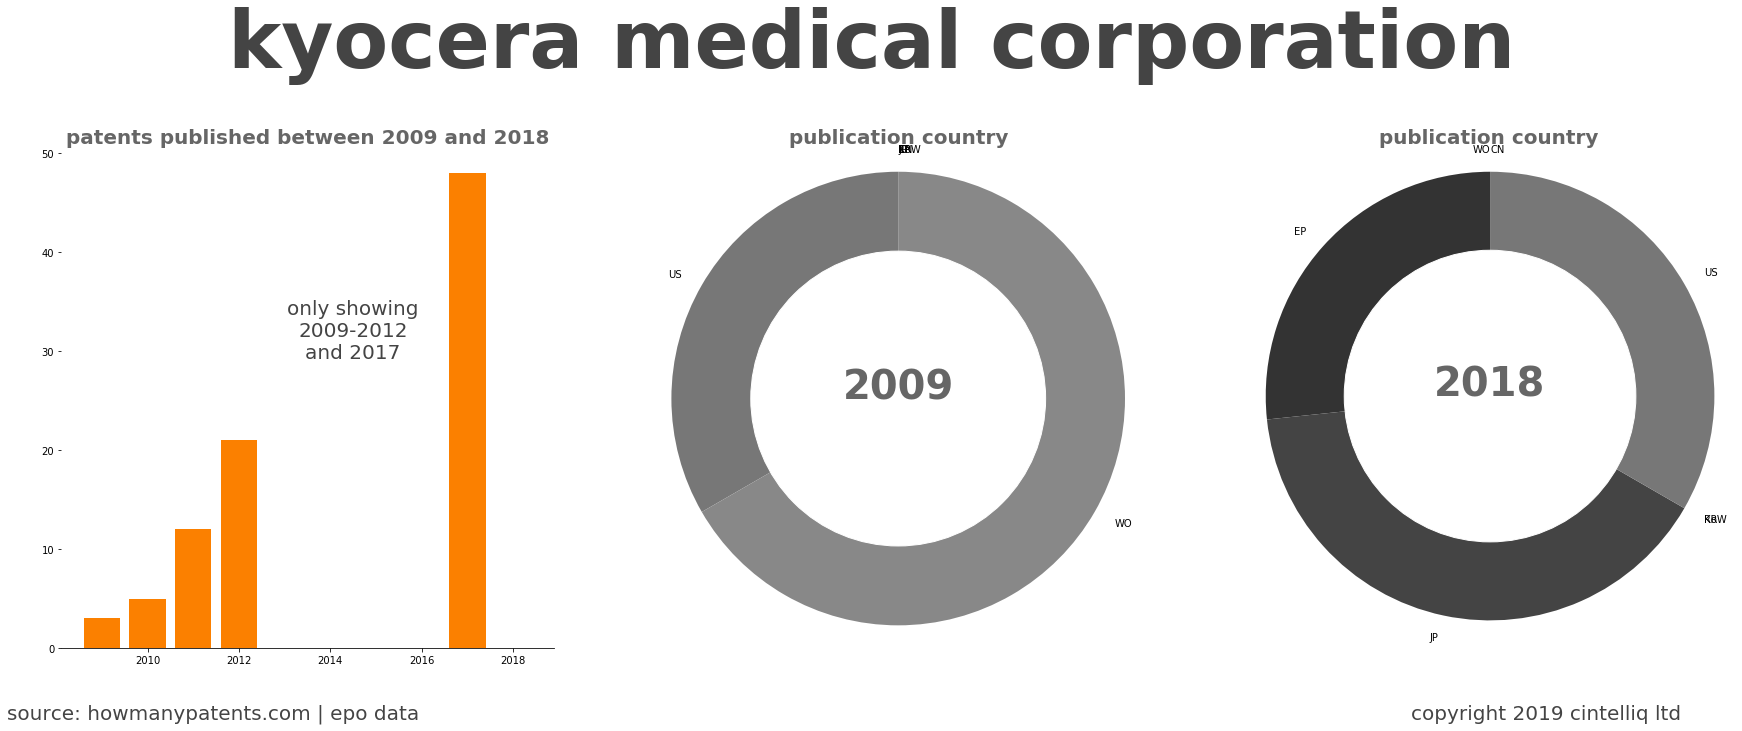 summary of patents for Kyocera Medical Corporation